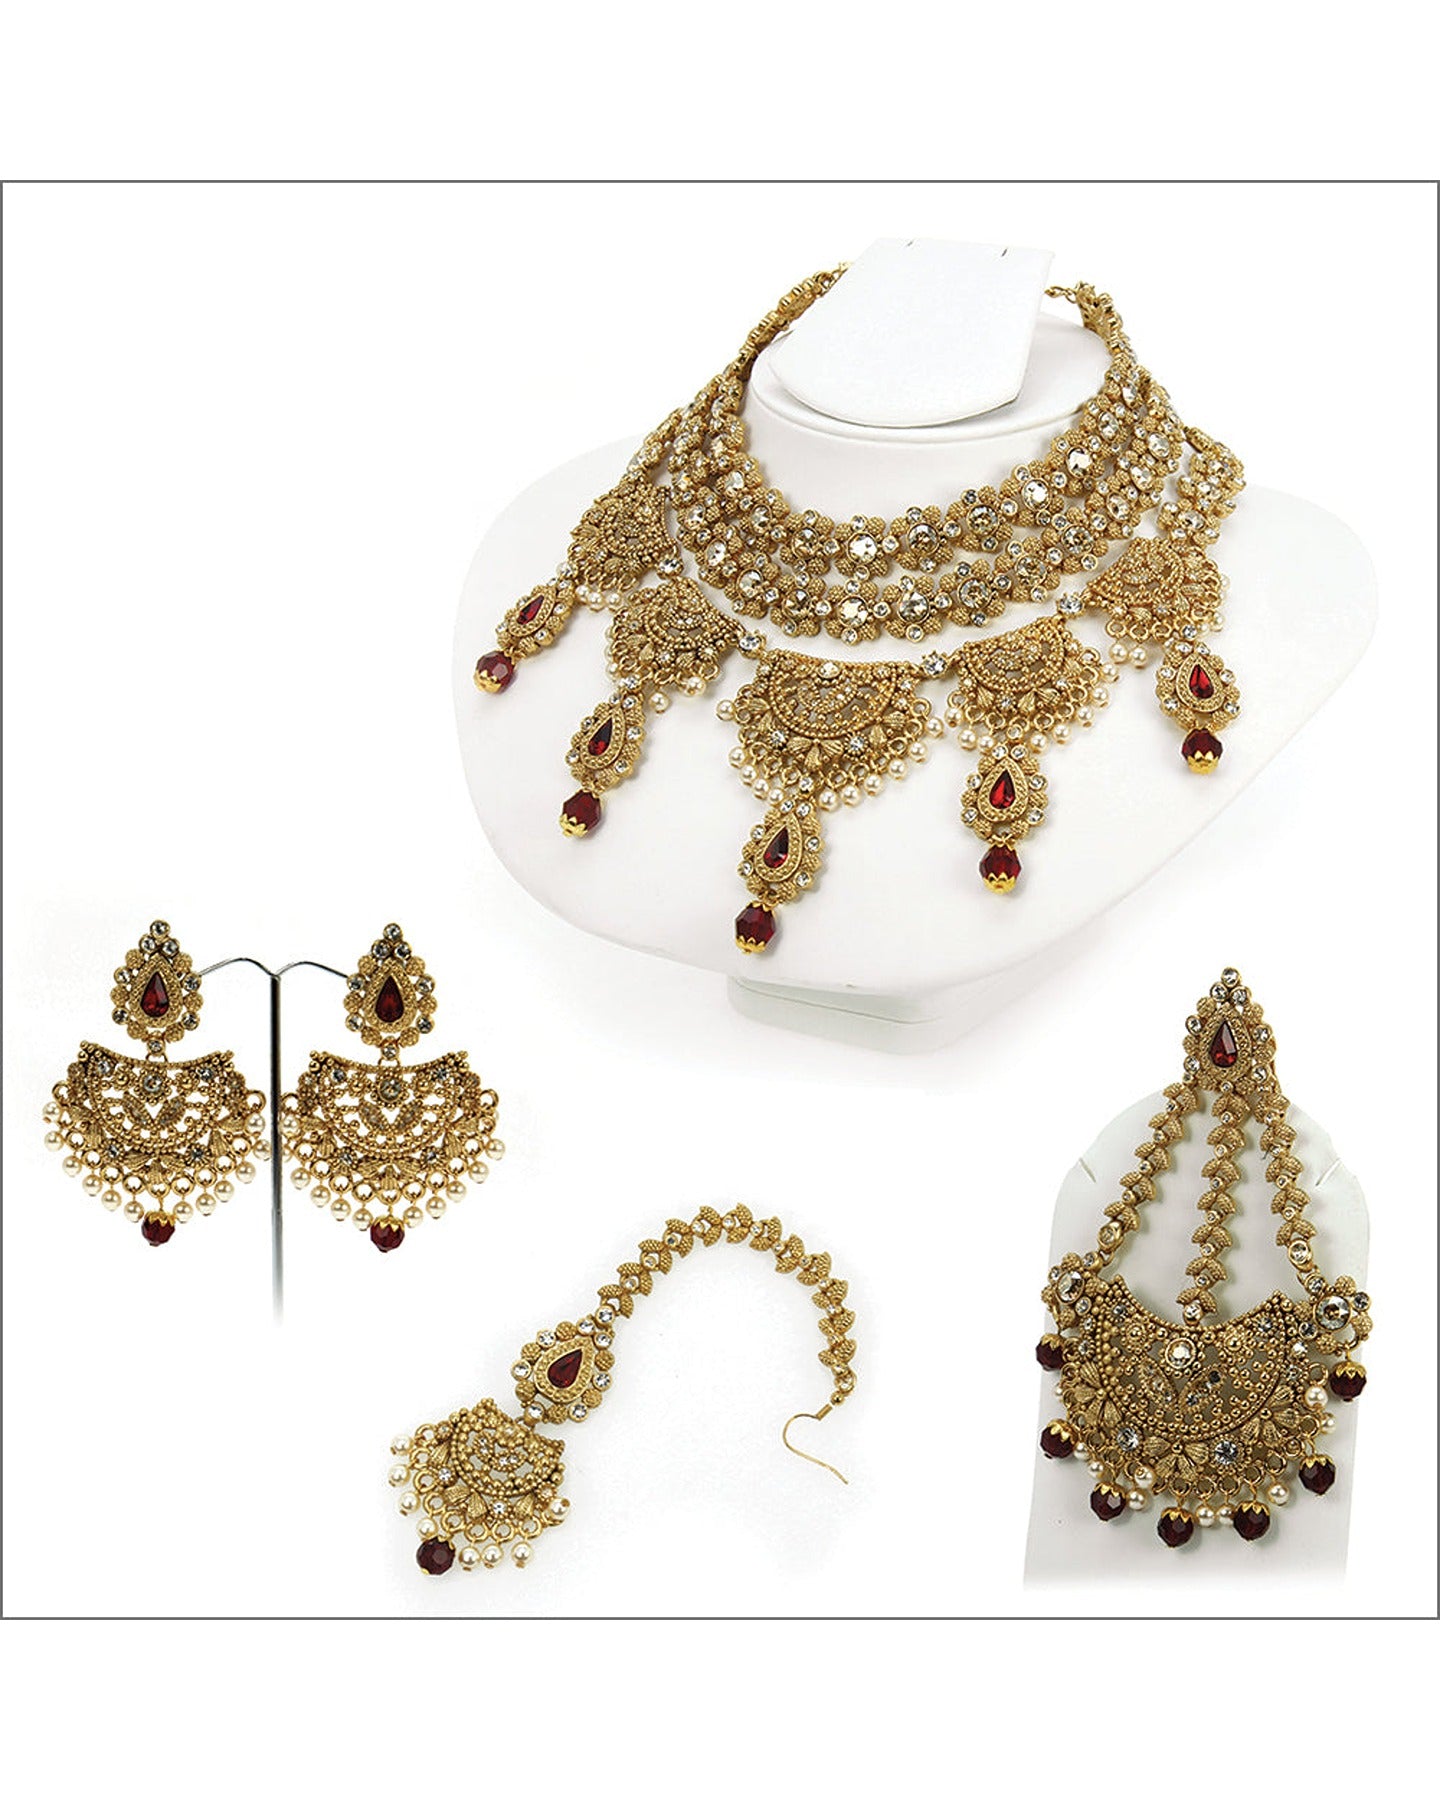  Radiant Antique Gold Jewelry with Siam Red and Crystal Golden Shadow Stones